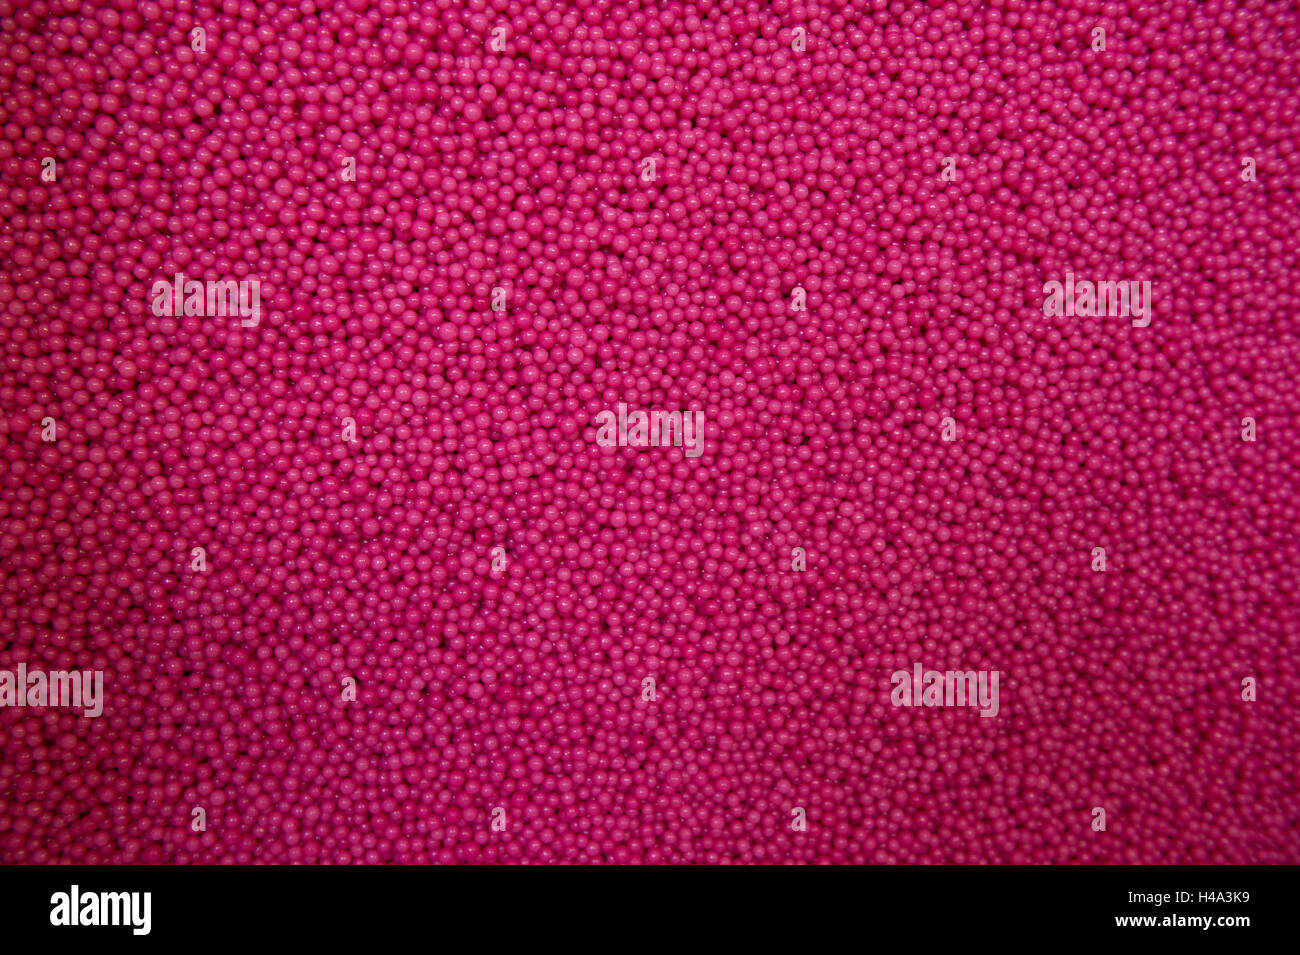 Gorlitz, Germany. 20th Sep, 2016. Pink love pearls can be seen in the sweets factory of Rudolf Hoinkis GmbH in Gorlitz, Germany, 20 September 2016. The sweets factory was founded on 16 August 1896 by Rudolf Hoinkis, the grandfather of nowadays' factory owner, Matthias Hoinkis. The business owes its worldwide publicity to the invention of the 'love pearl'. PHOTO: ARNO BURGI/dpa/Alamy Live News Stock Photo